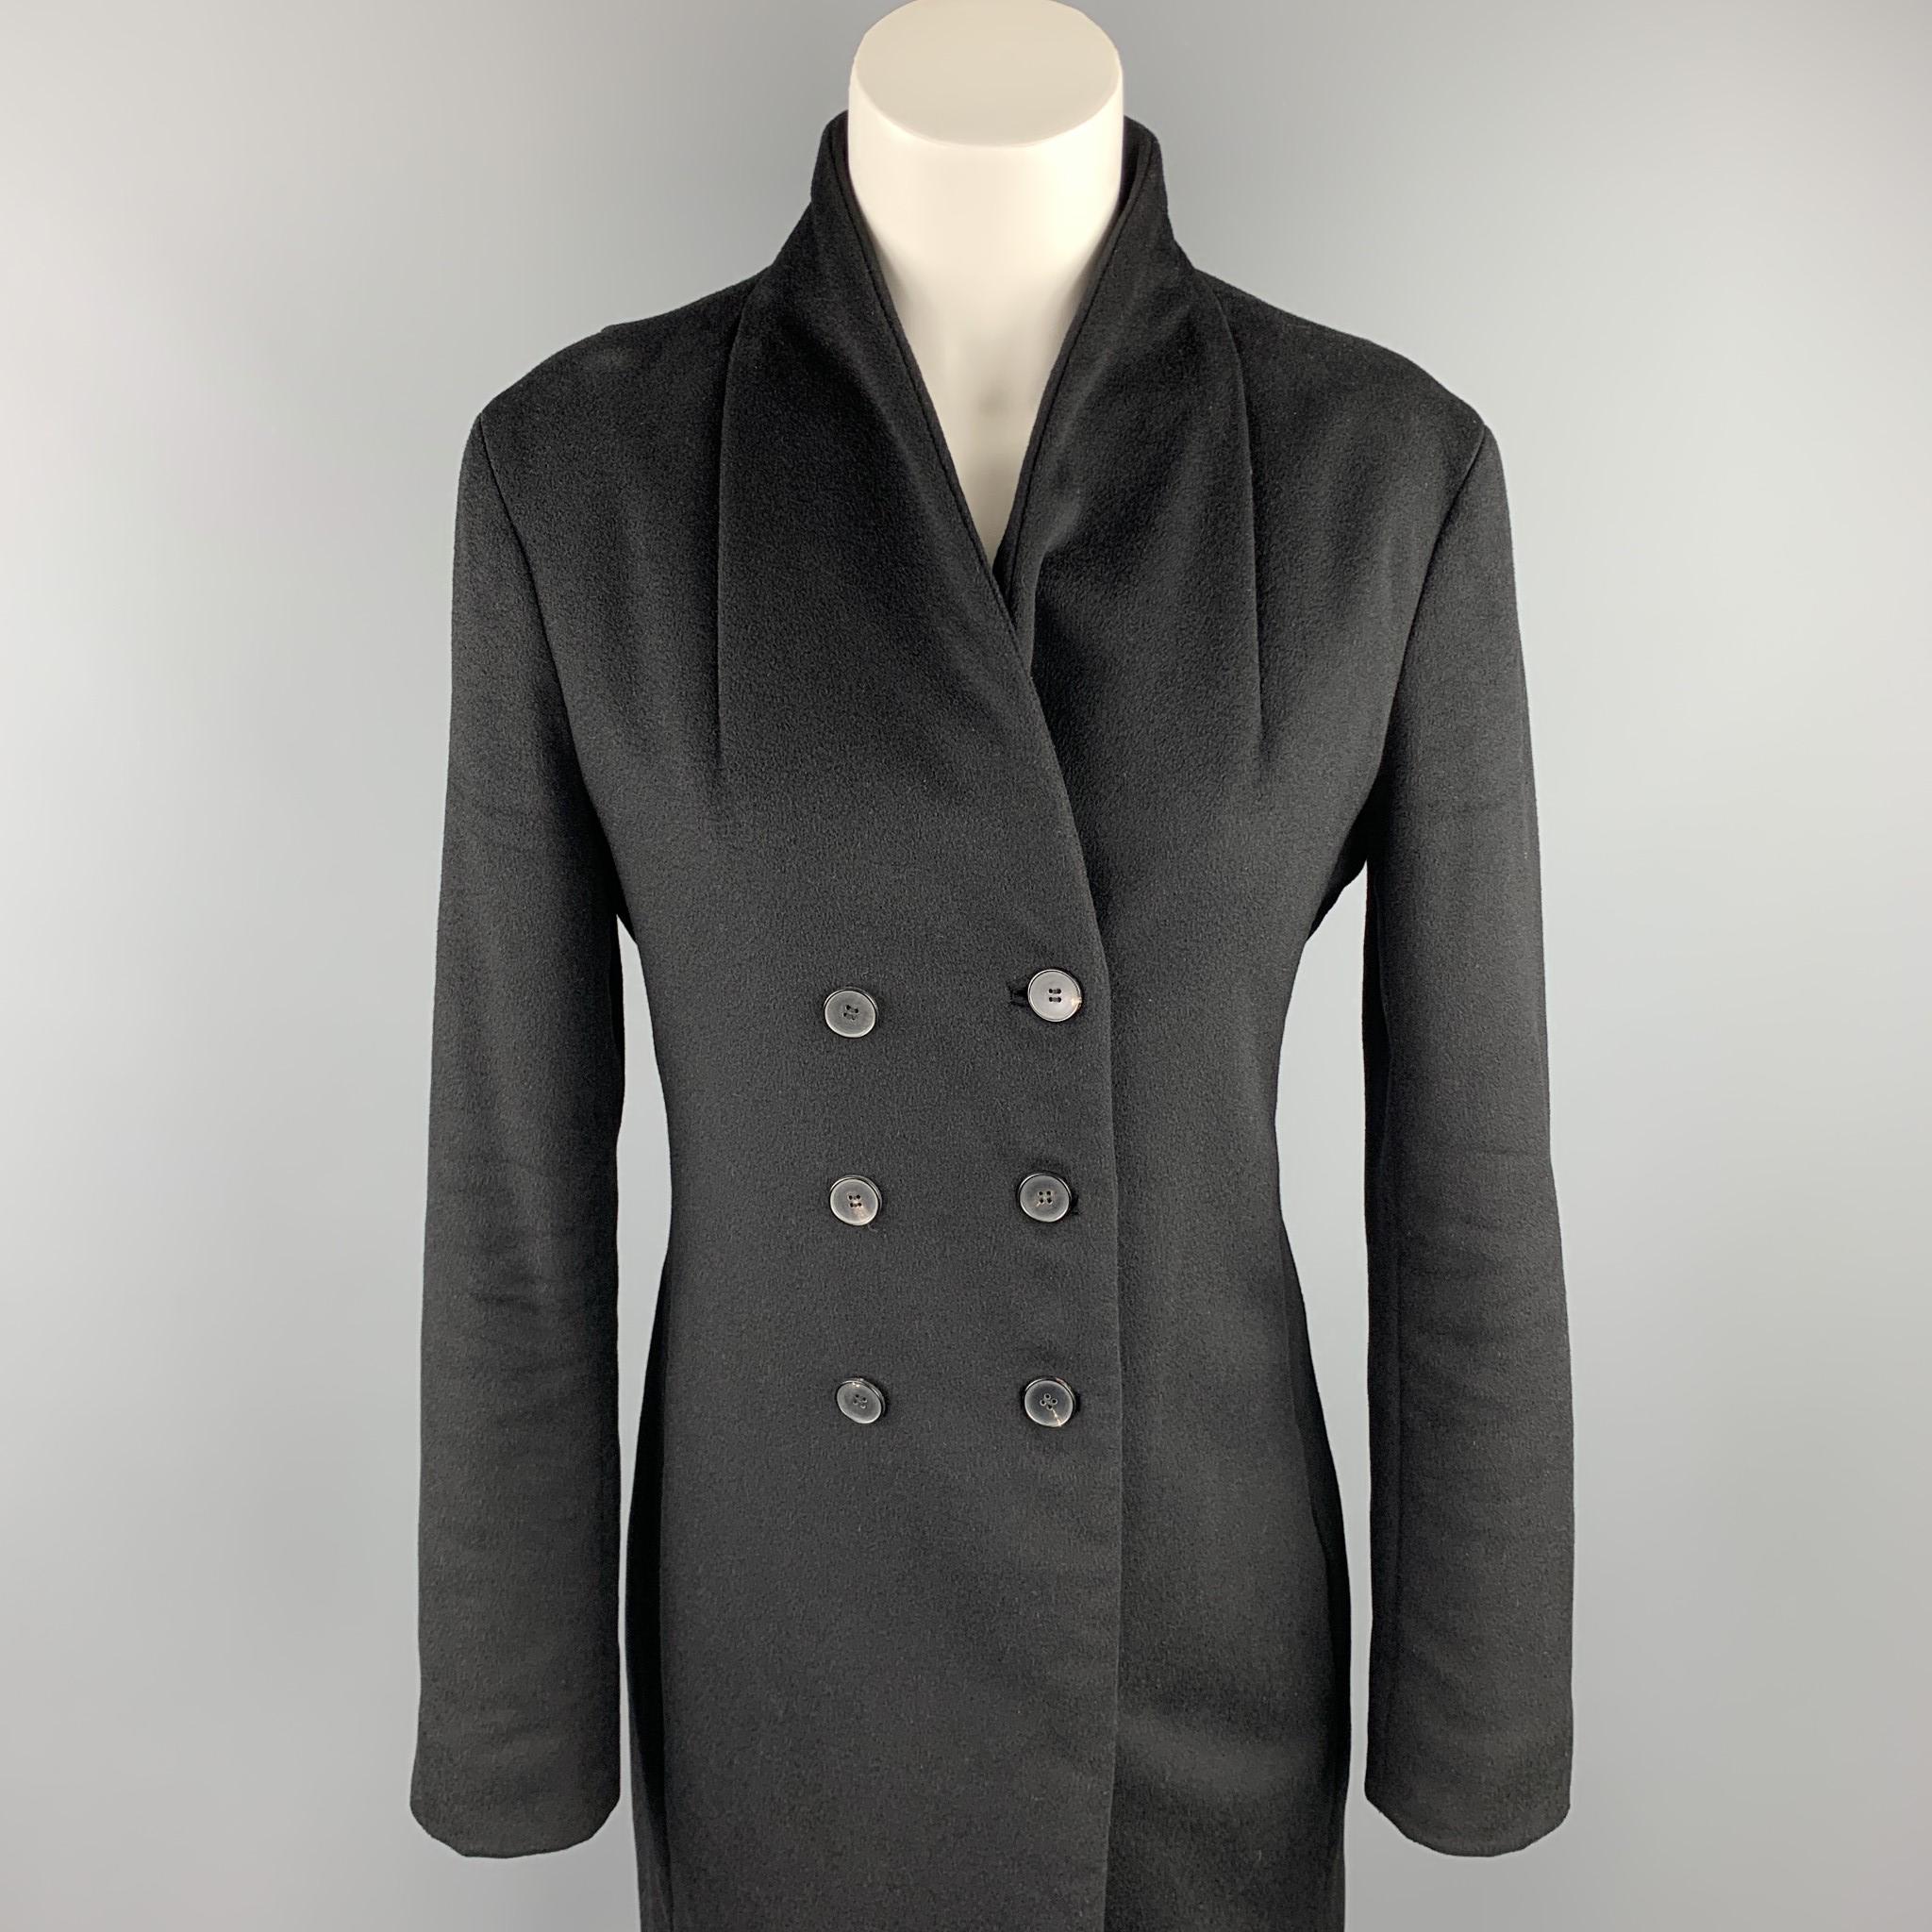 JIL SANDER coat comes in a black cashmere blend with a full black liner featuring a shawl collar, slit pockets, and a double breasted closure. Made in Italy.

Excellent Pre-Owned Condition.
Marked: 36
Original Retail Price: